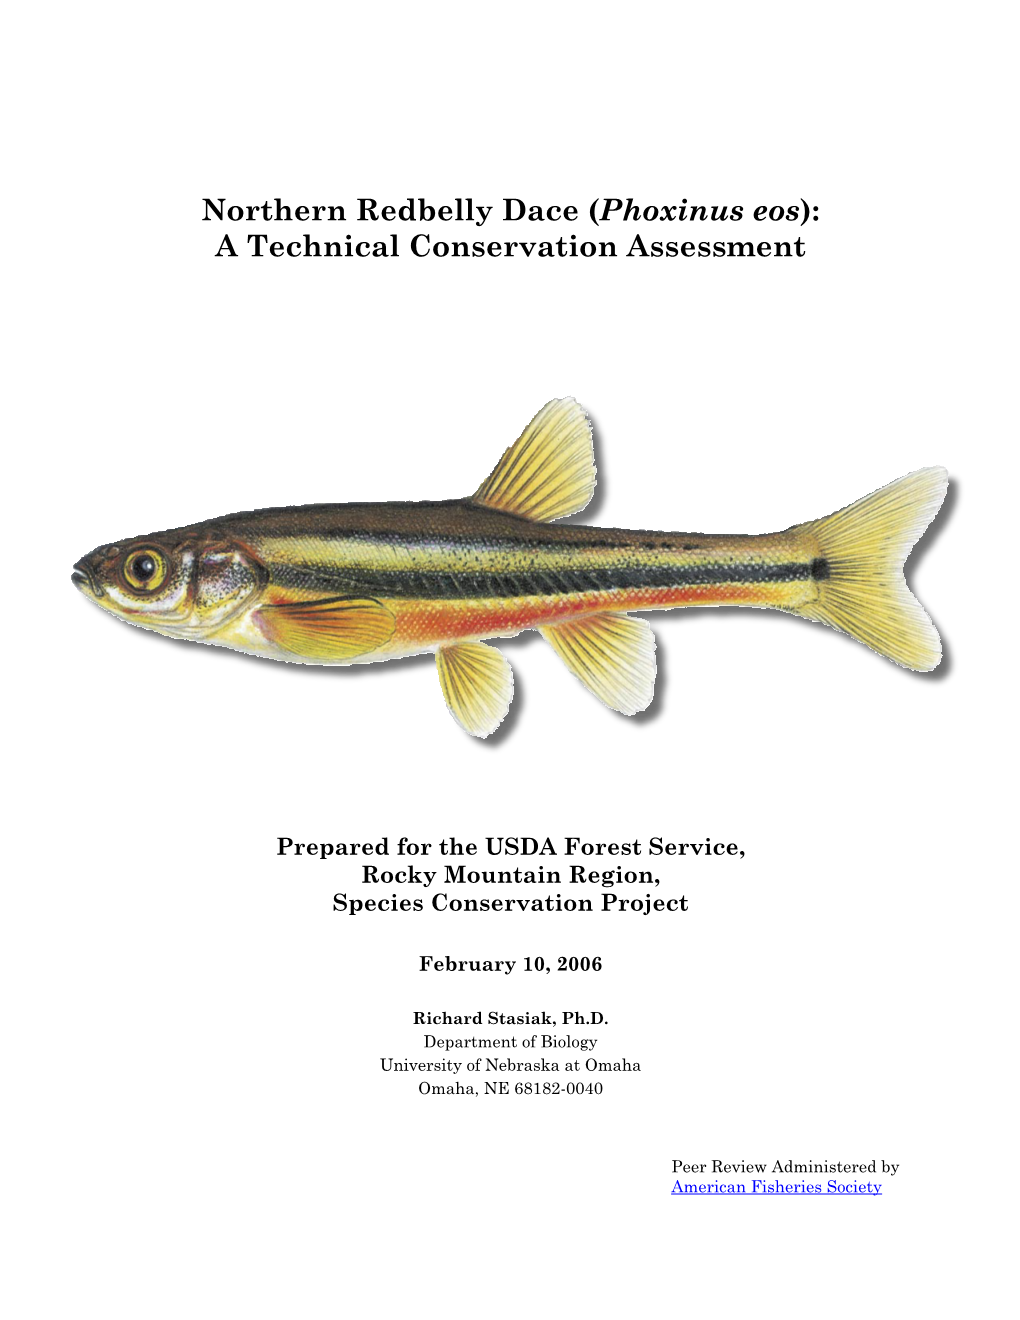 Northern Redbelly Dace (Phoxinus Eos): a Technical Conservation Assessment